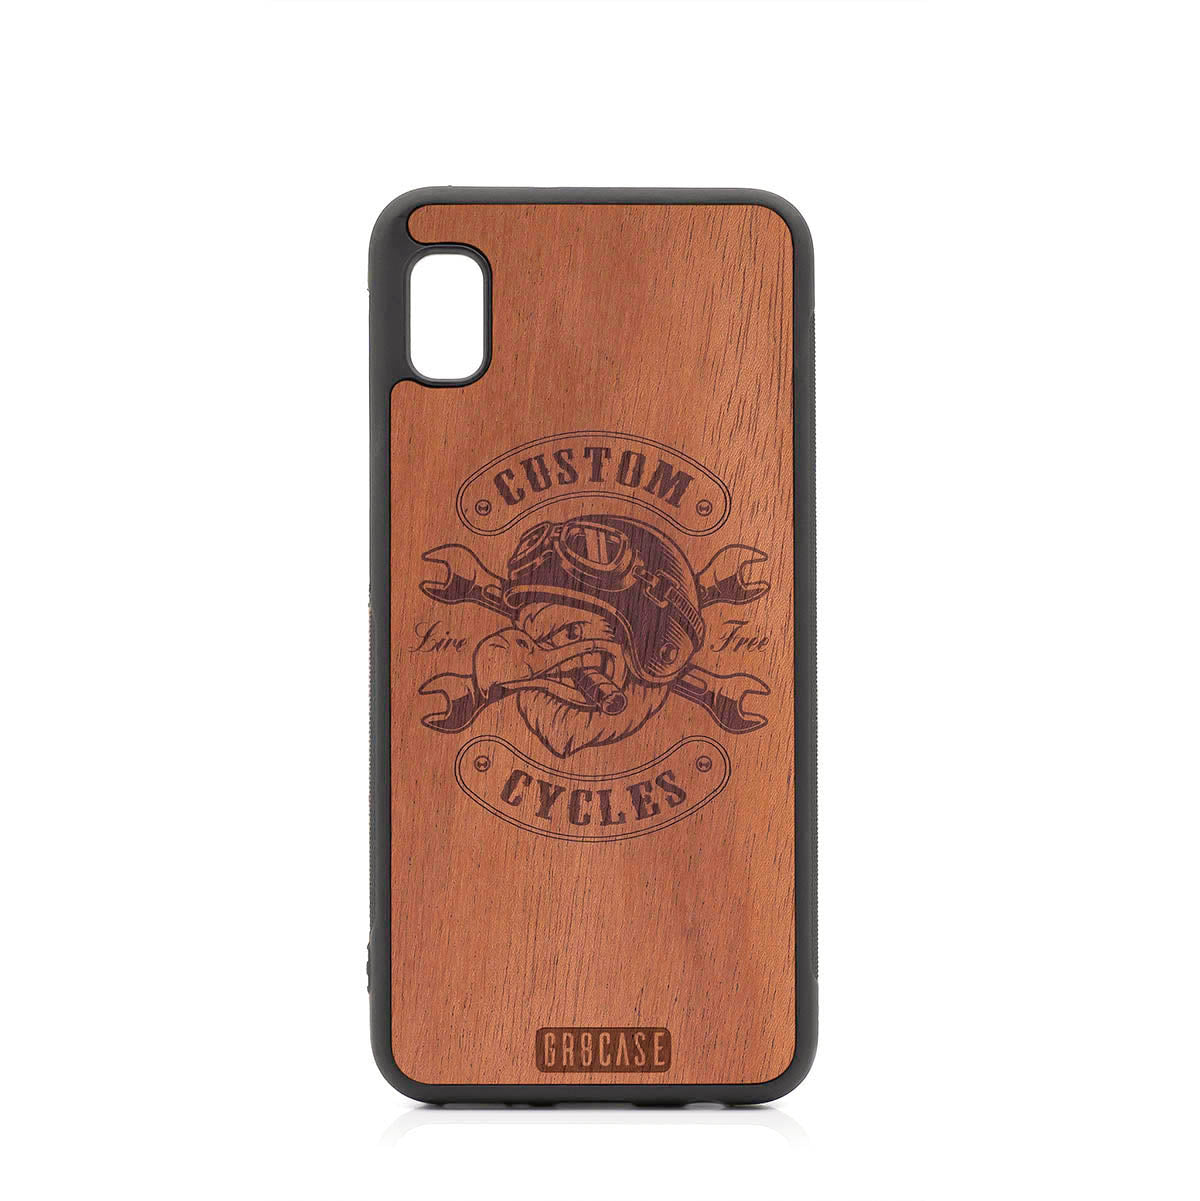 Custom Cycles Live Free (Biker Eagle) Design Wood Case For Samsung Galaxy A10E by GR8CASE